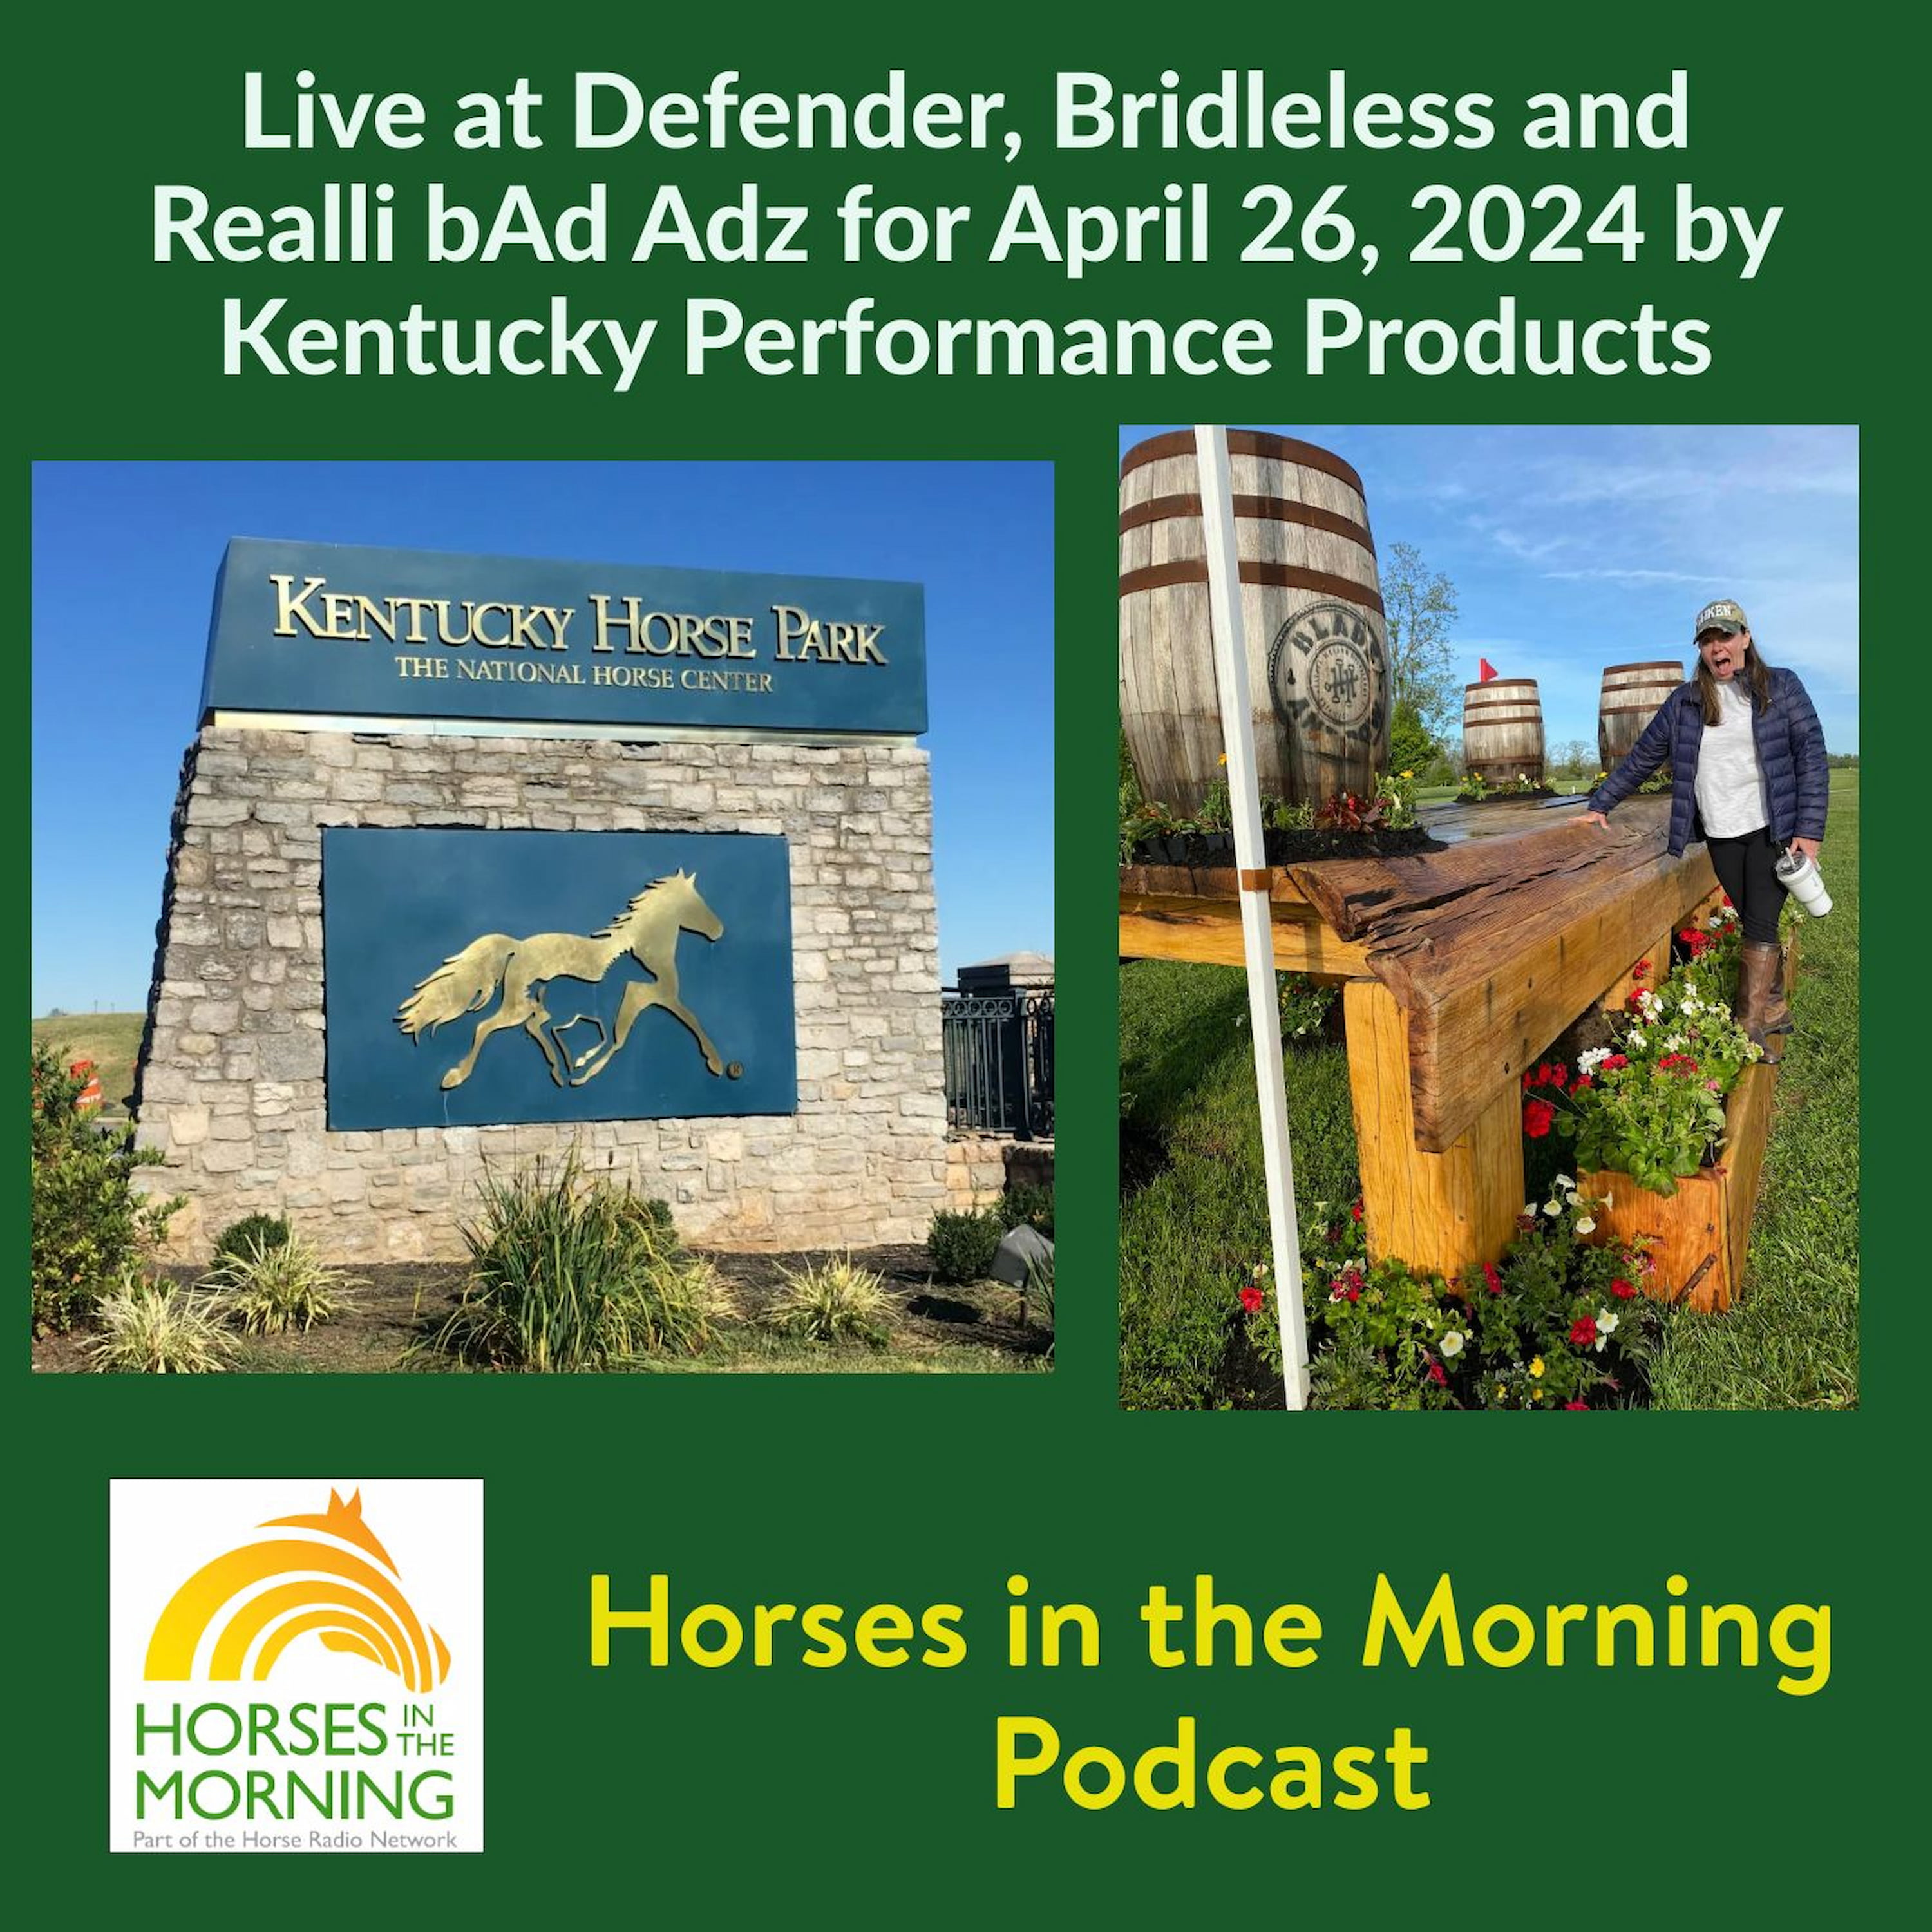 Live at Defender, Bridleless and Realli bAd Adz for April 26, 2024 by Kentucky Performance Products